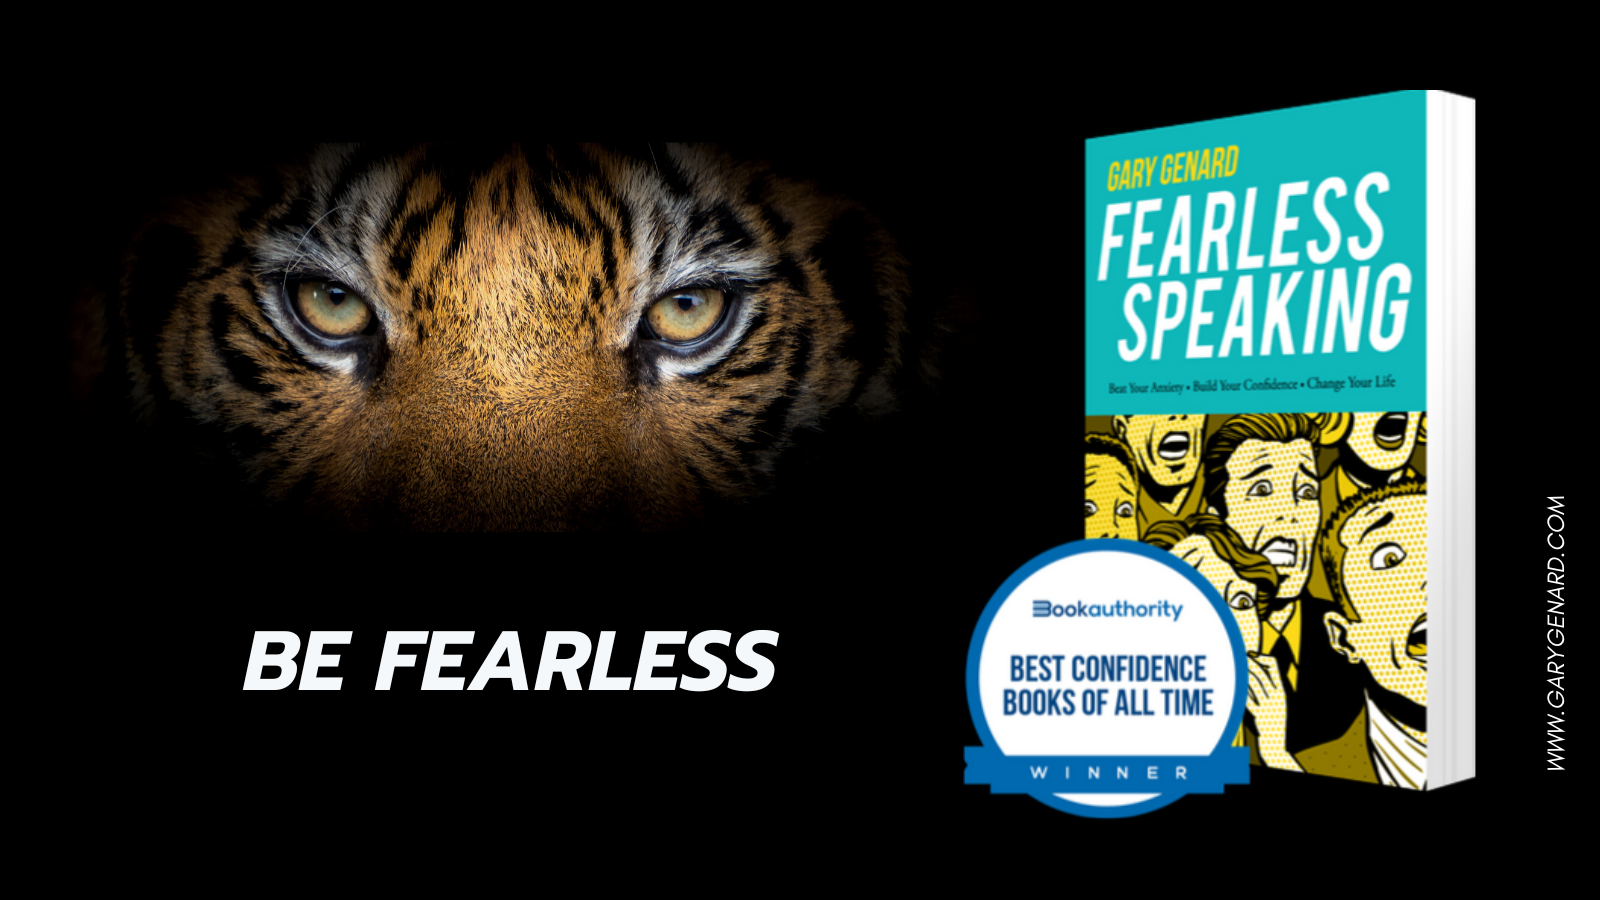 Overcome your fear of public speaking with Dr. Gary Genard's book, Fearless Speaking.